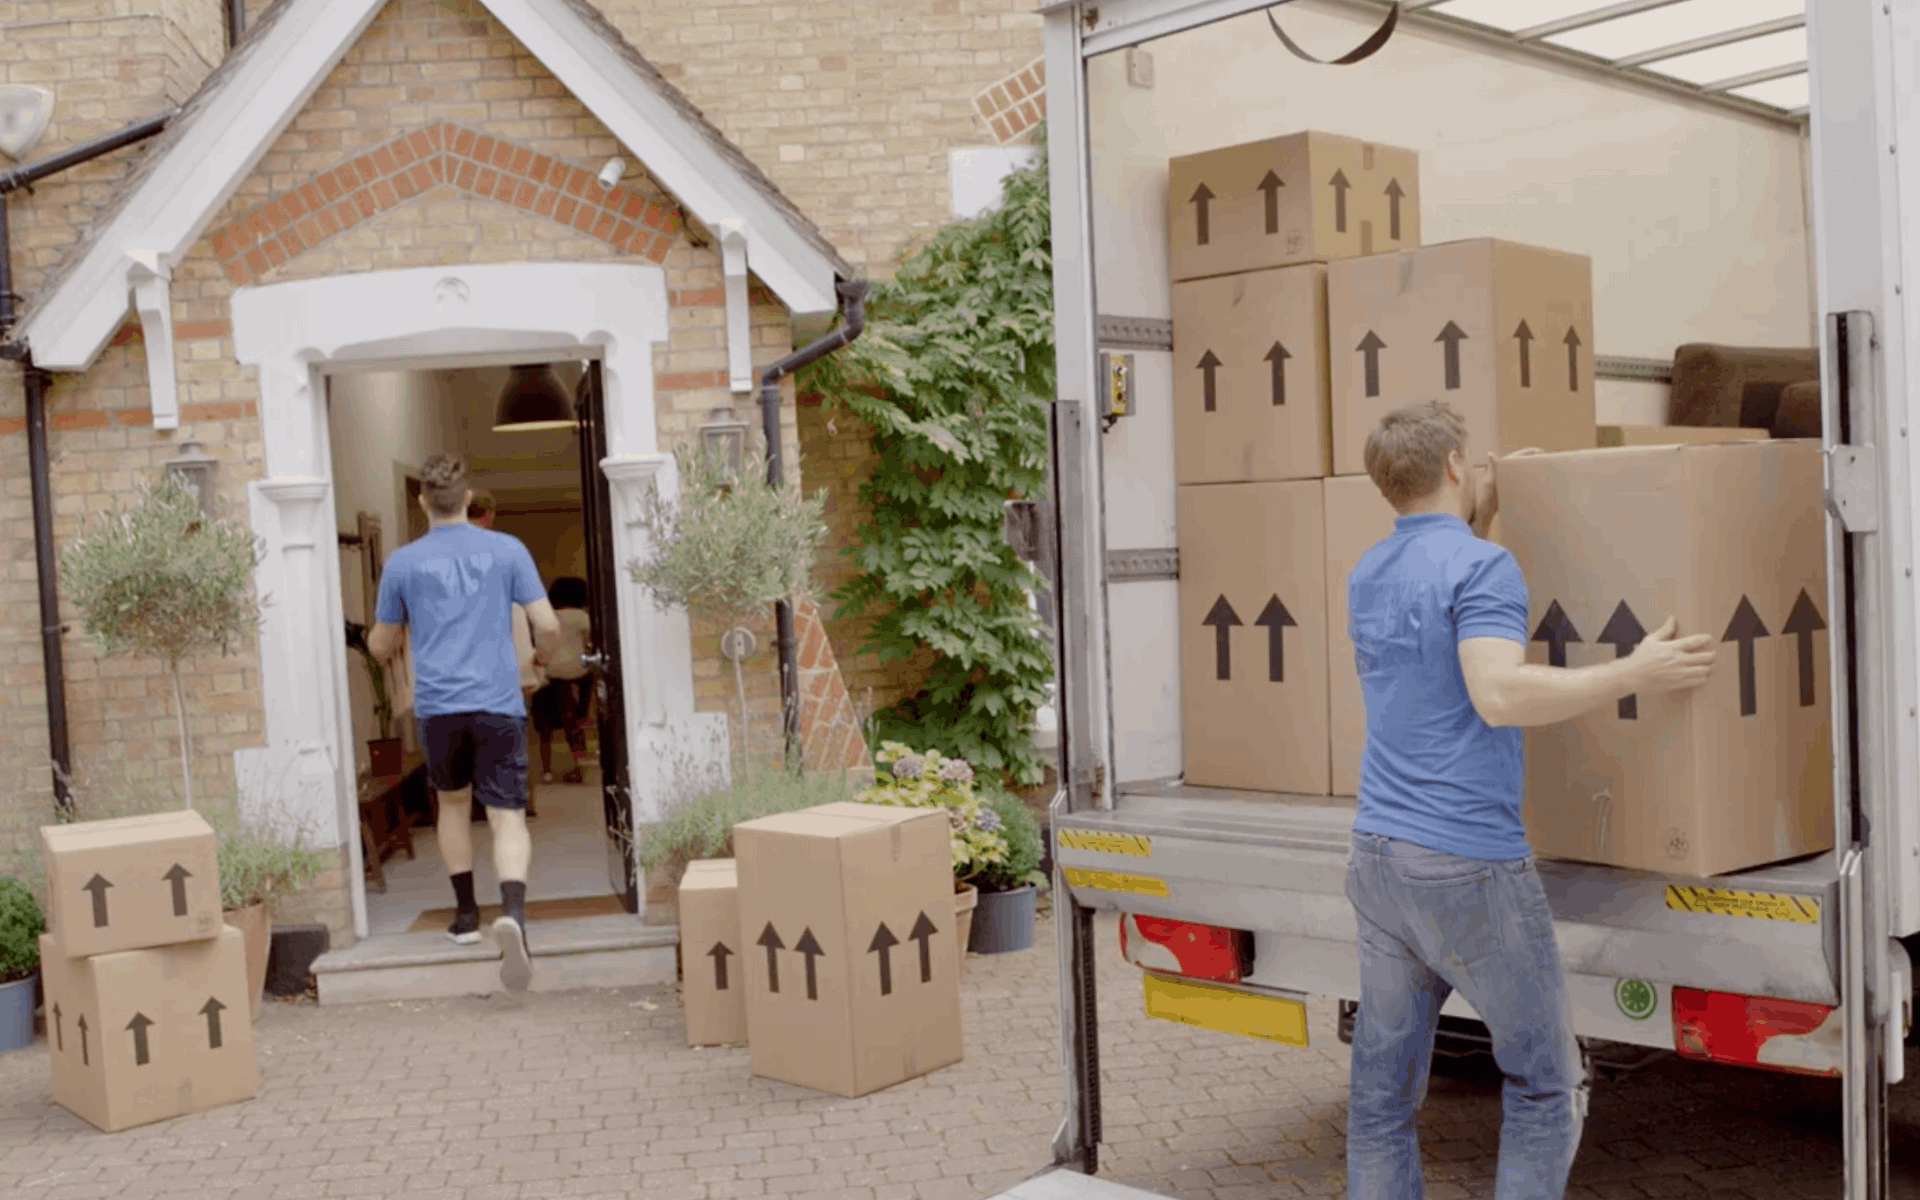 Movers carrying boxes from a truck into a house